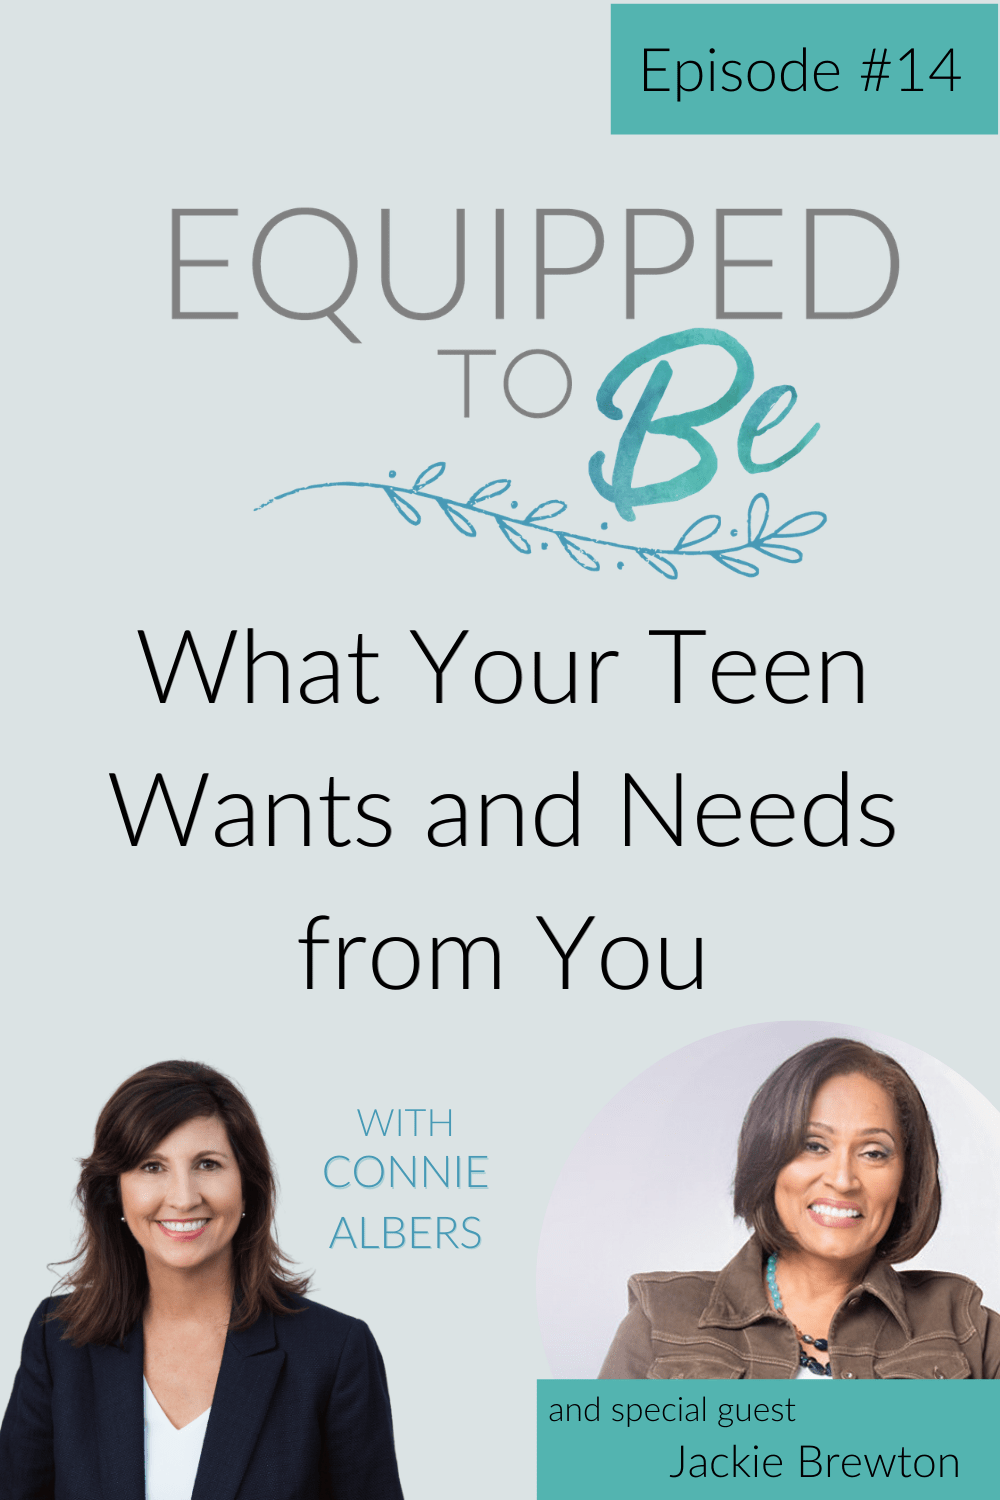 What Your Teen Wants and Needs from You with Jackie Brewton - ETB #14